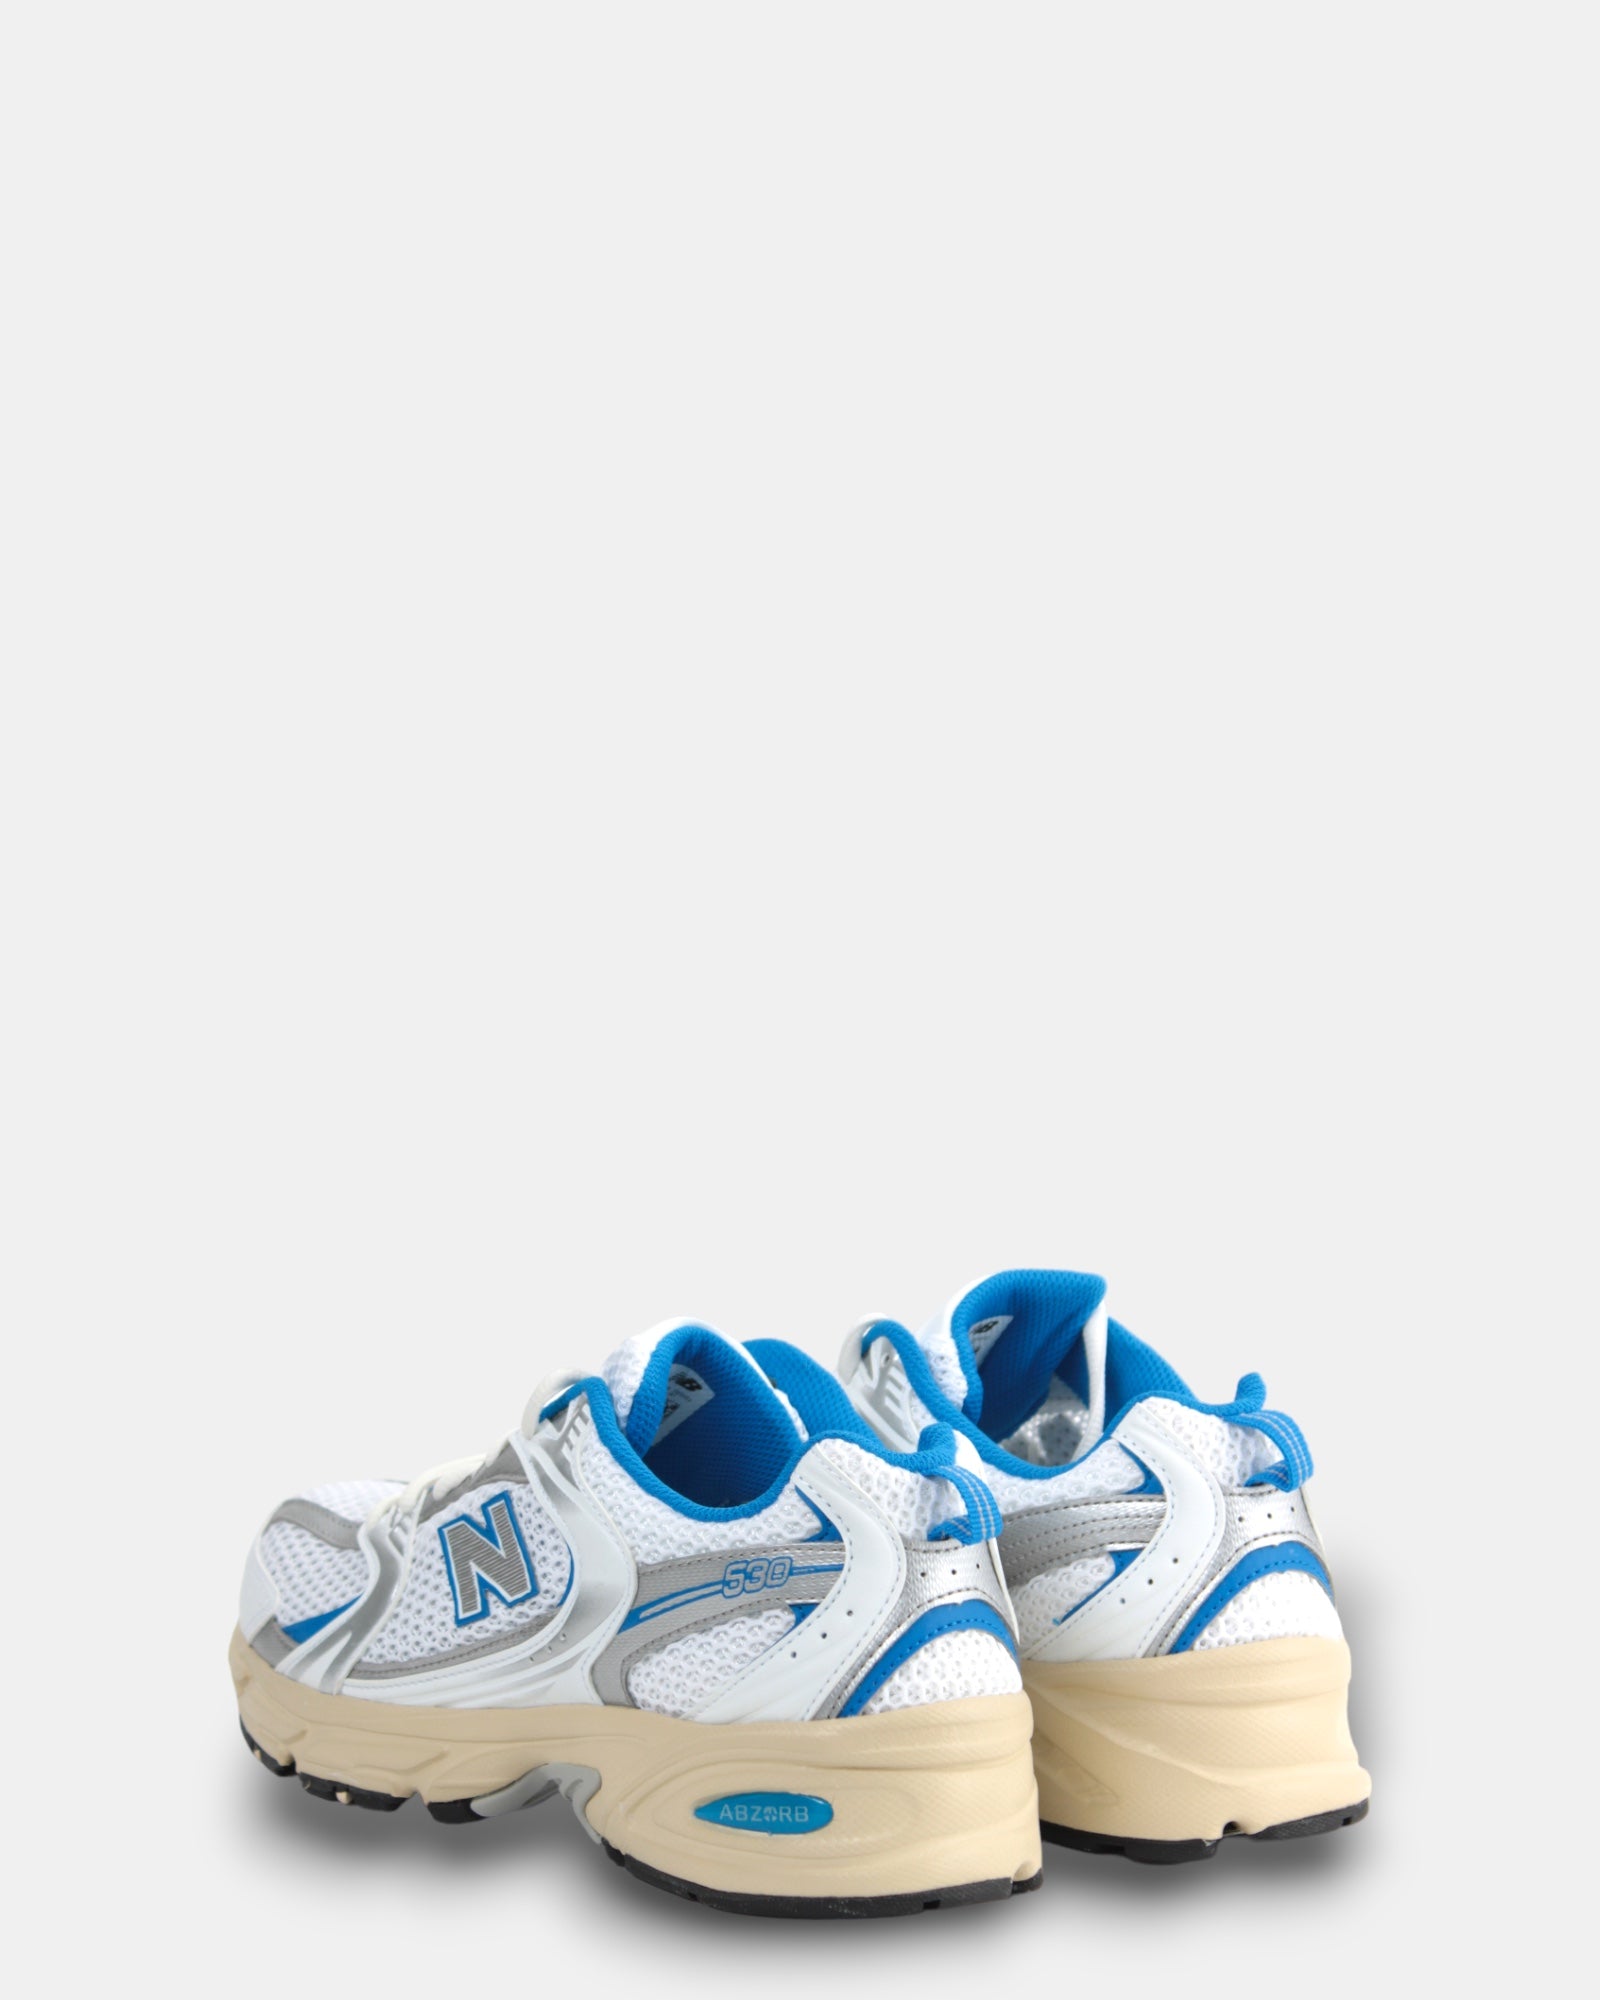 SNEAKERS White/blue New Balance